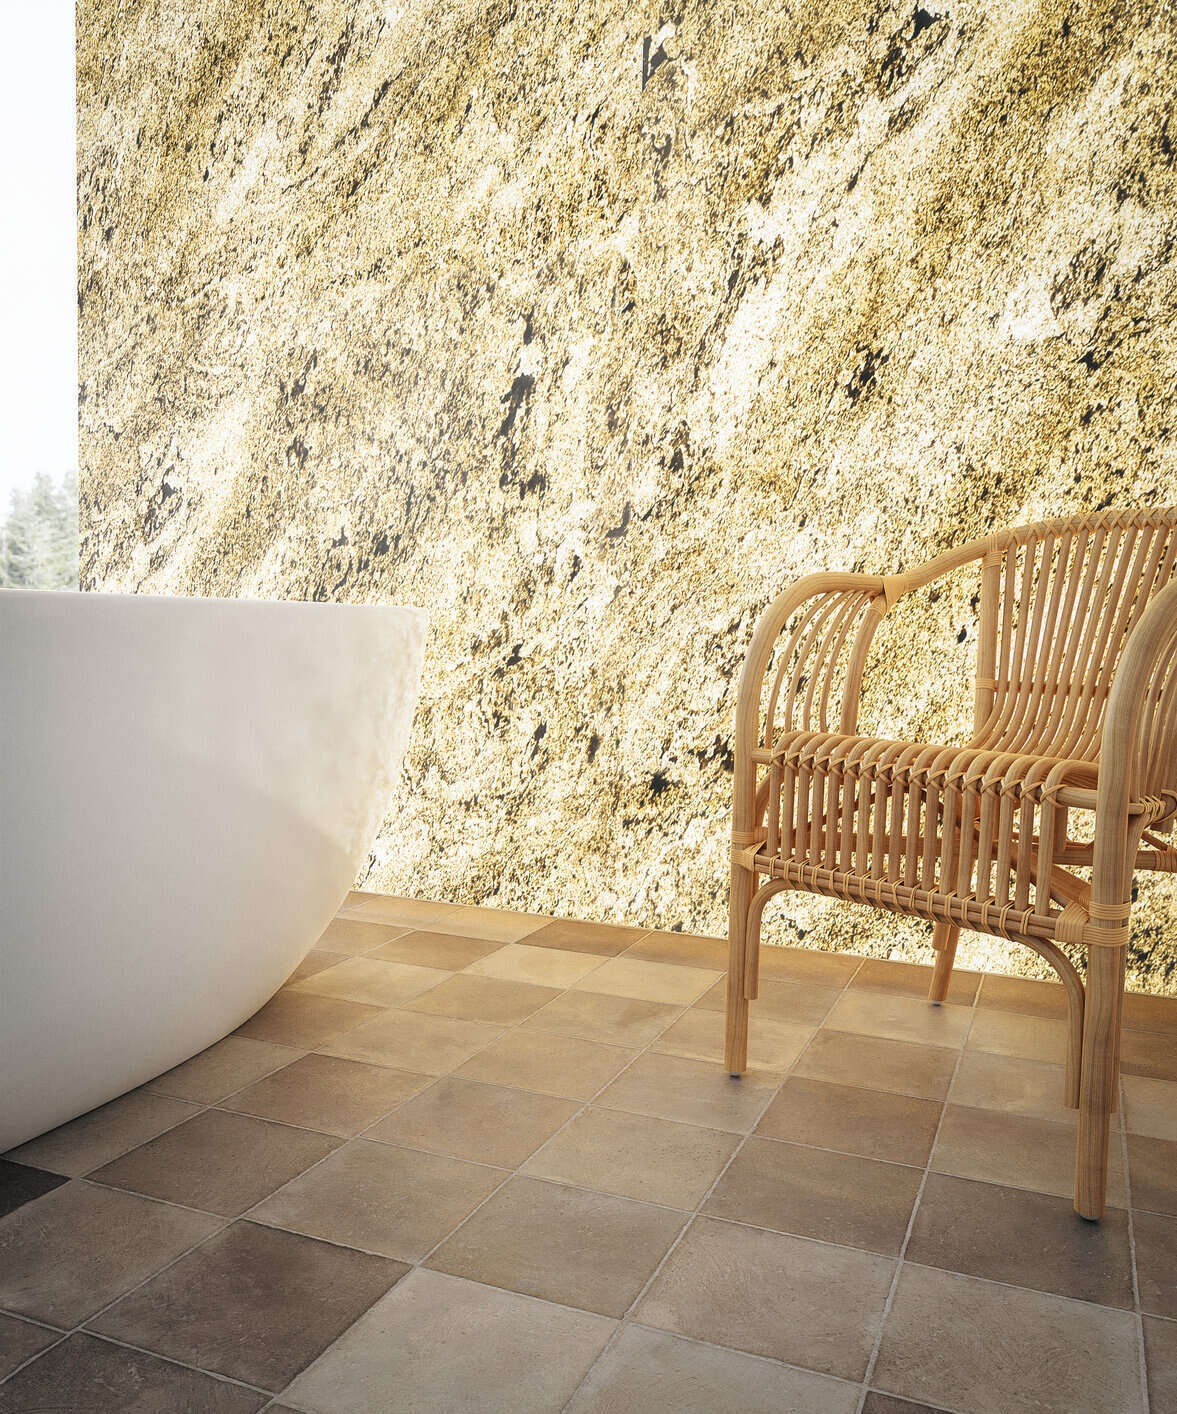 Stoneskin by Stoneart _ innovative material _ natural stone